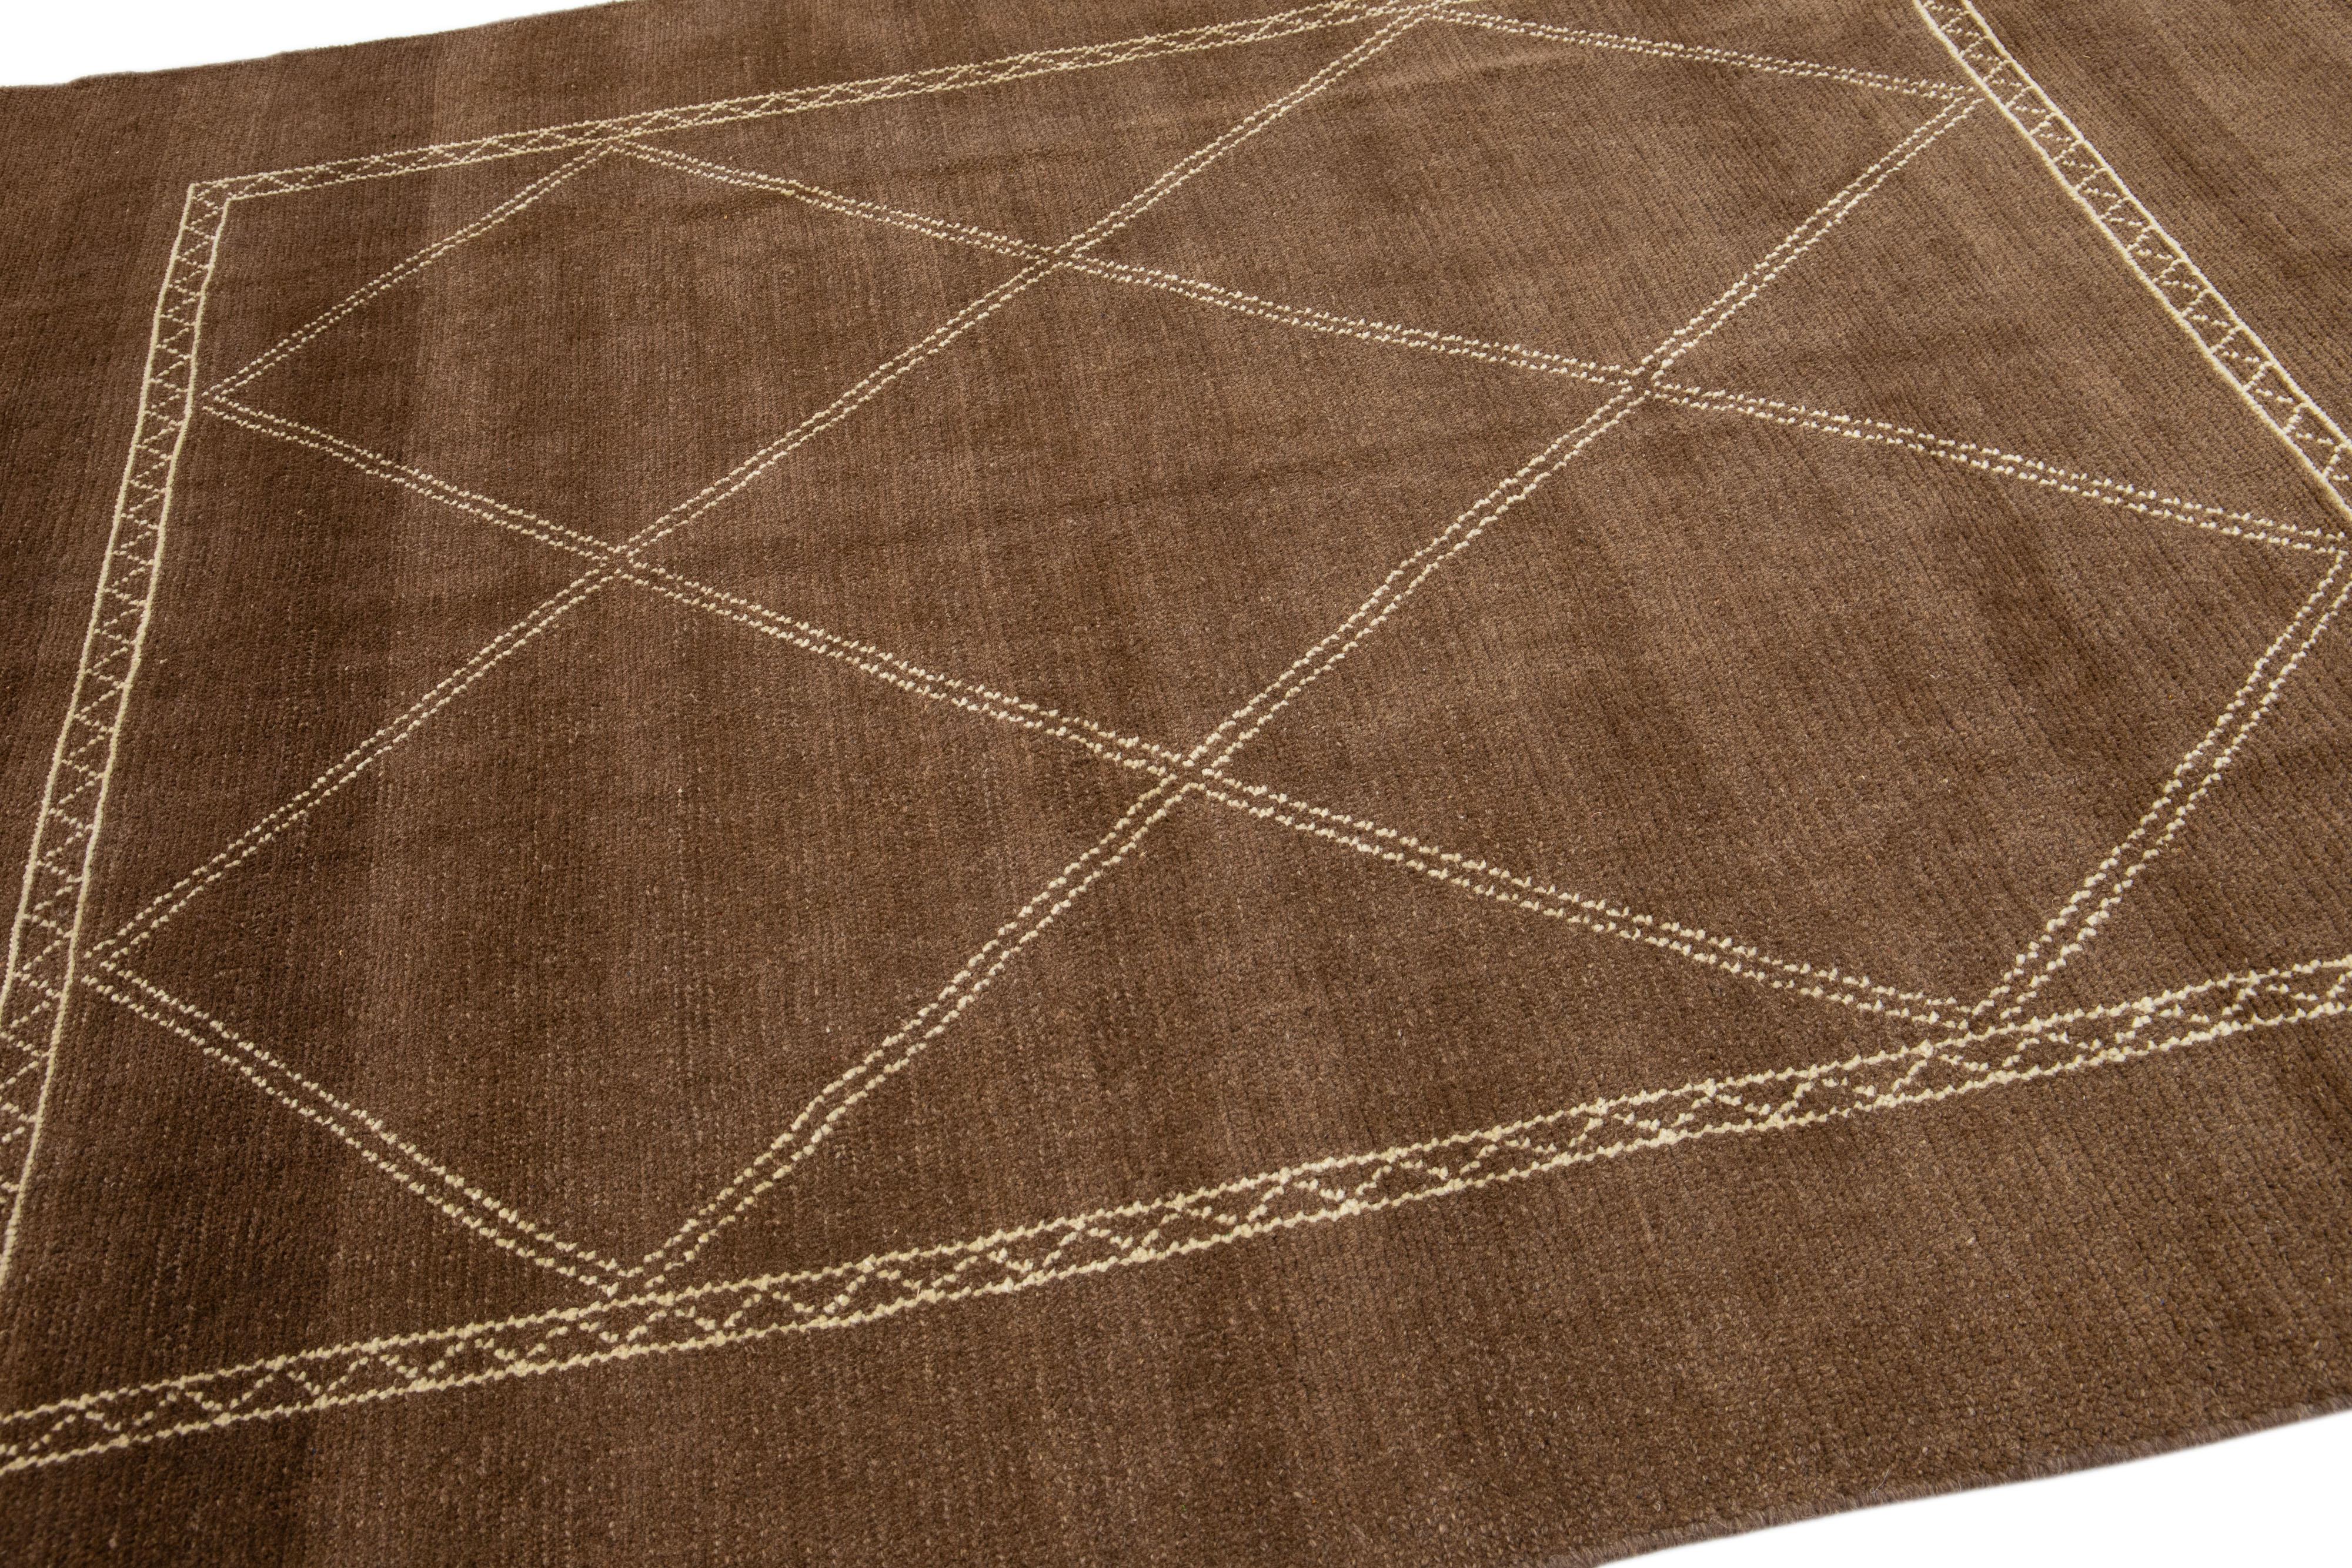 Tribal Modern Moroccan Style Handmade Brown Wool Rug by Apadana In New Condition For Sale In Norwalk, CT